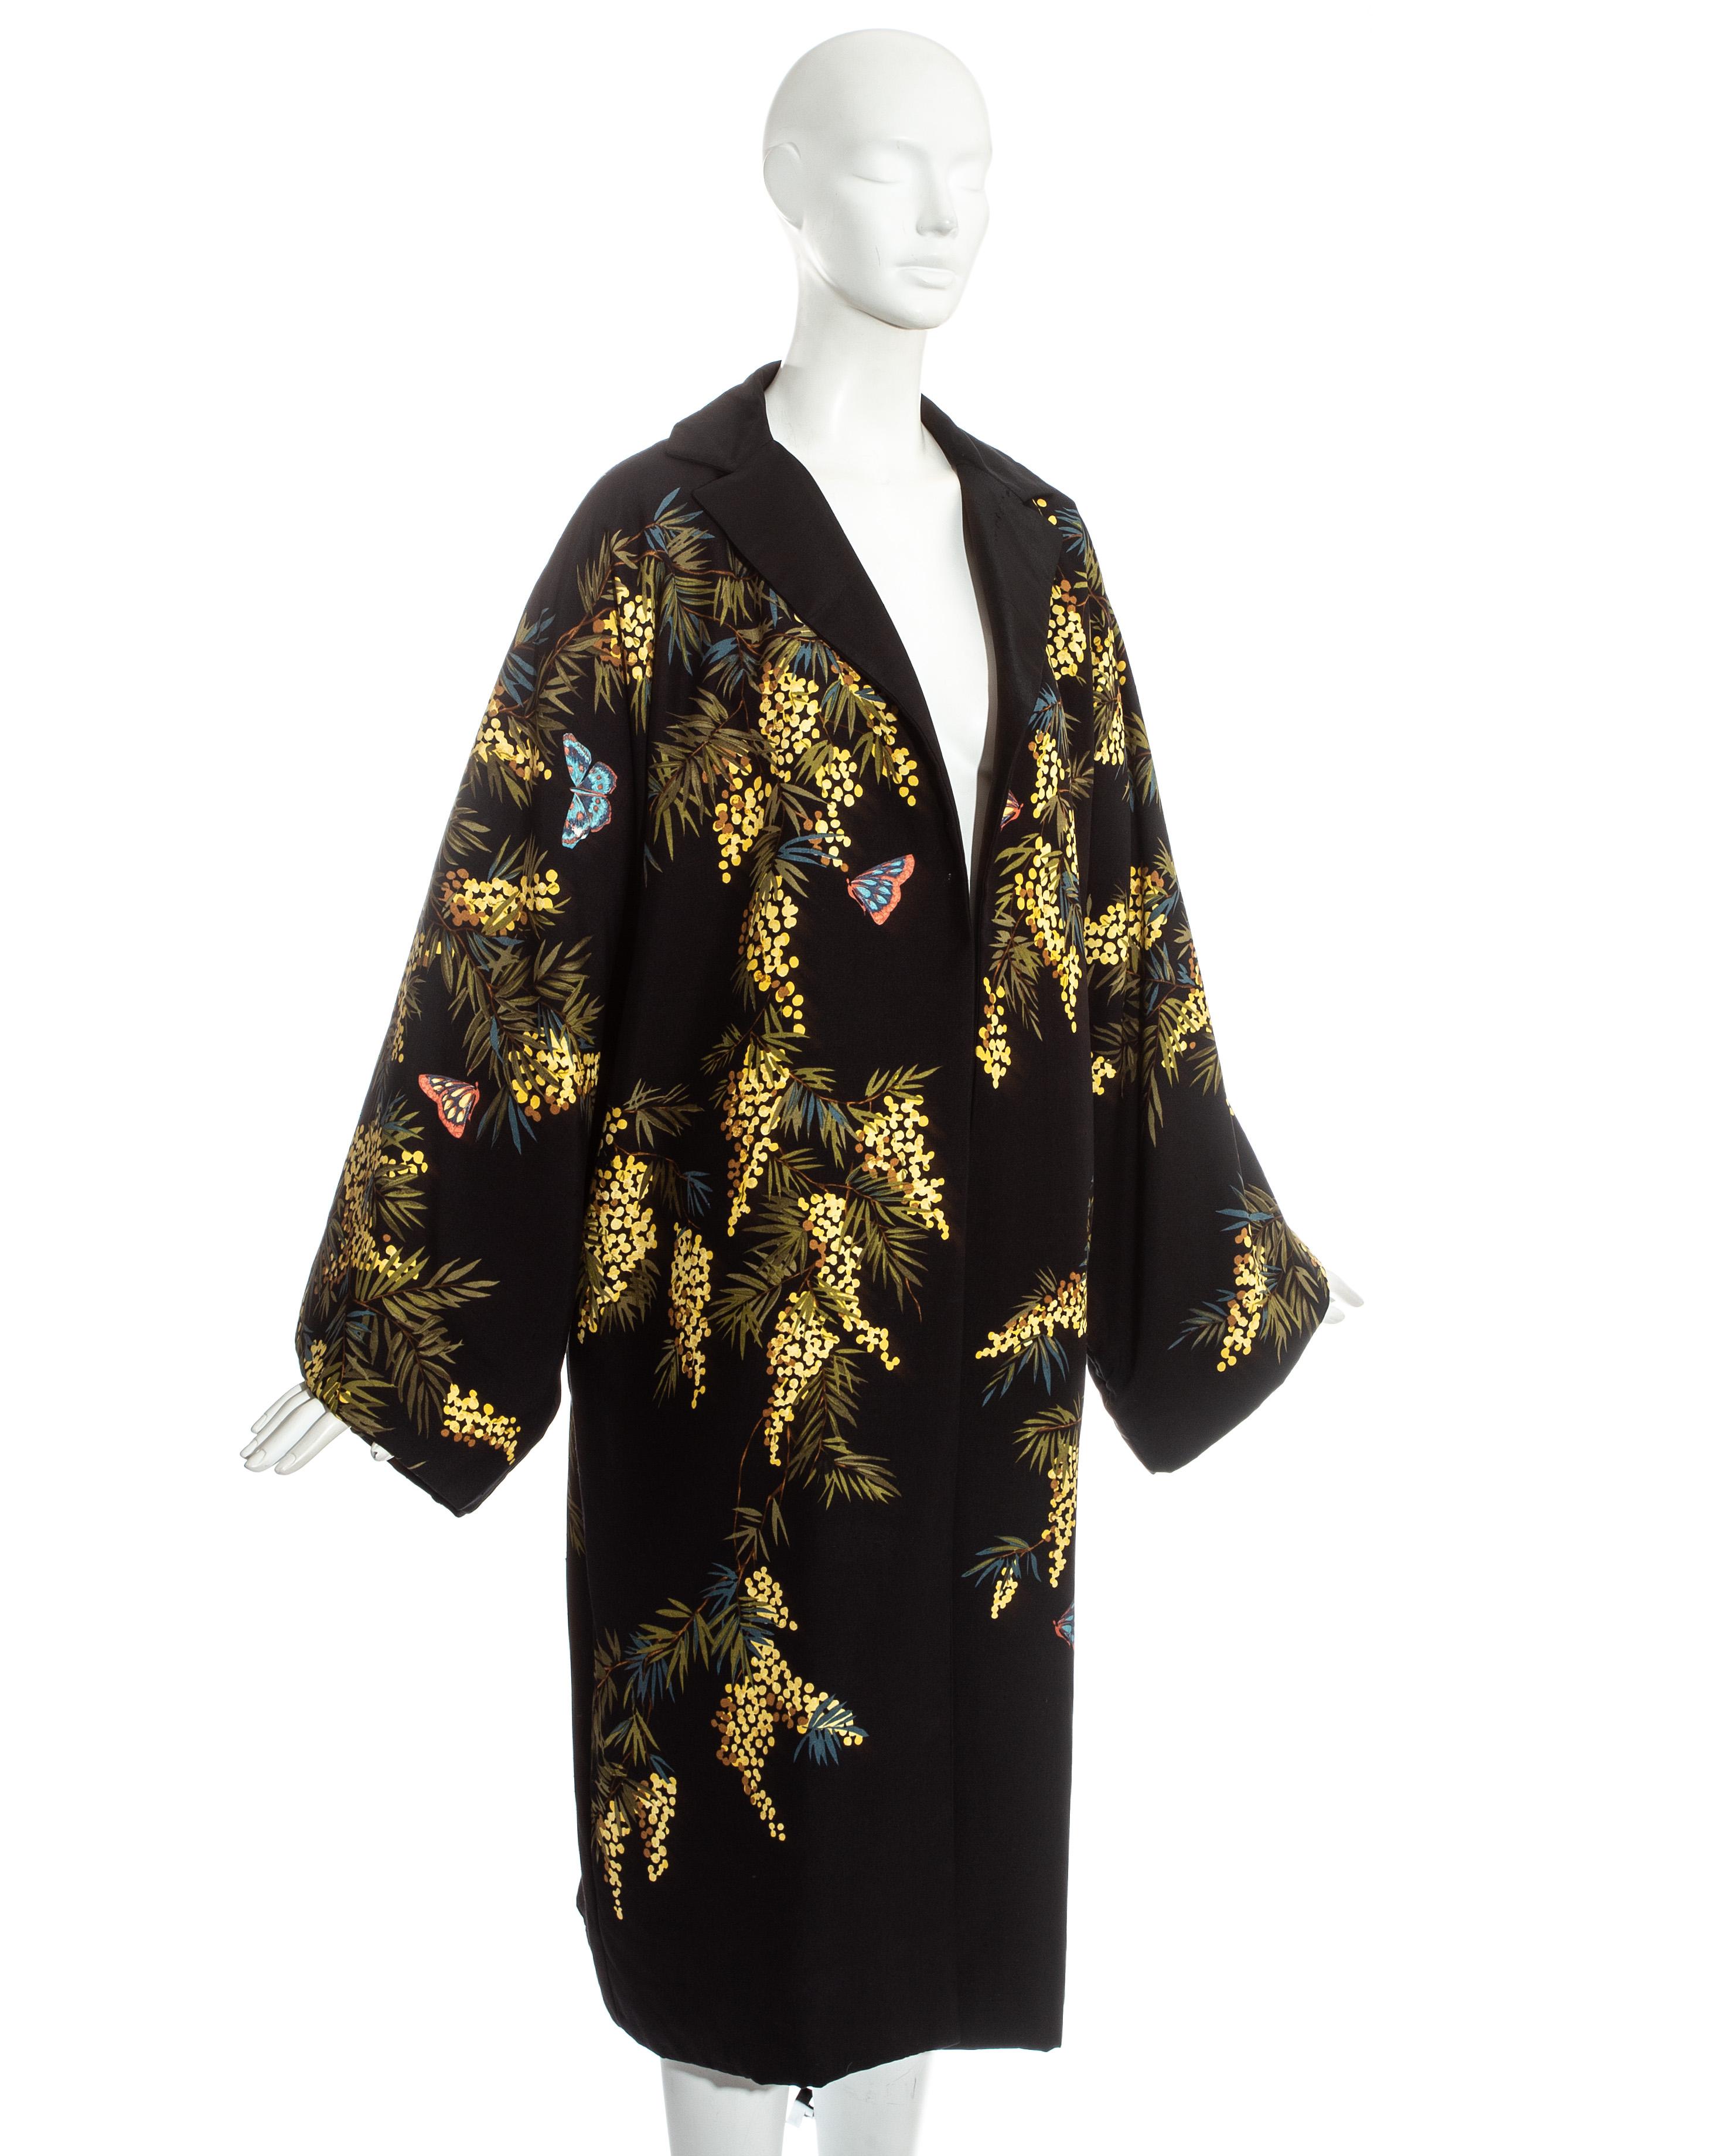 Dolce & Gabbana oversized black silk evening kimono with yellow floral painted print.

Fall-Winter 1998